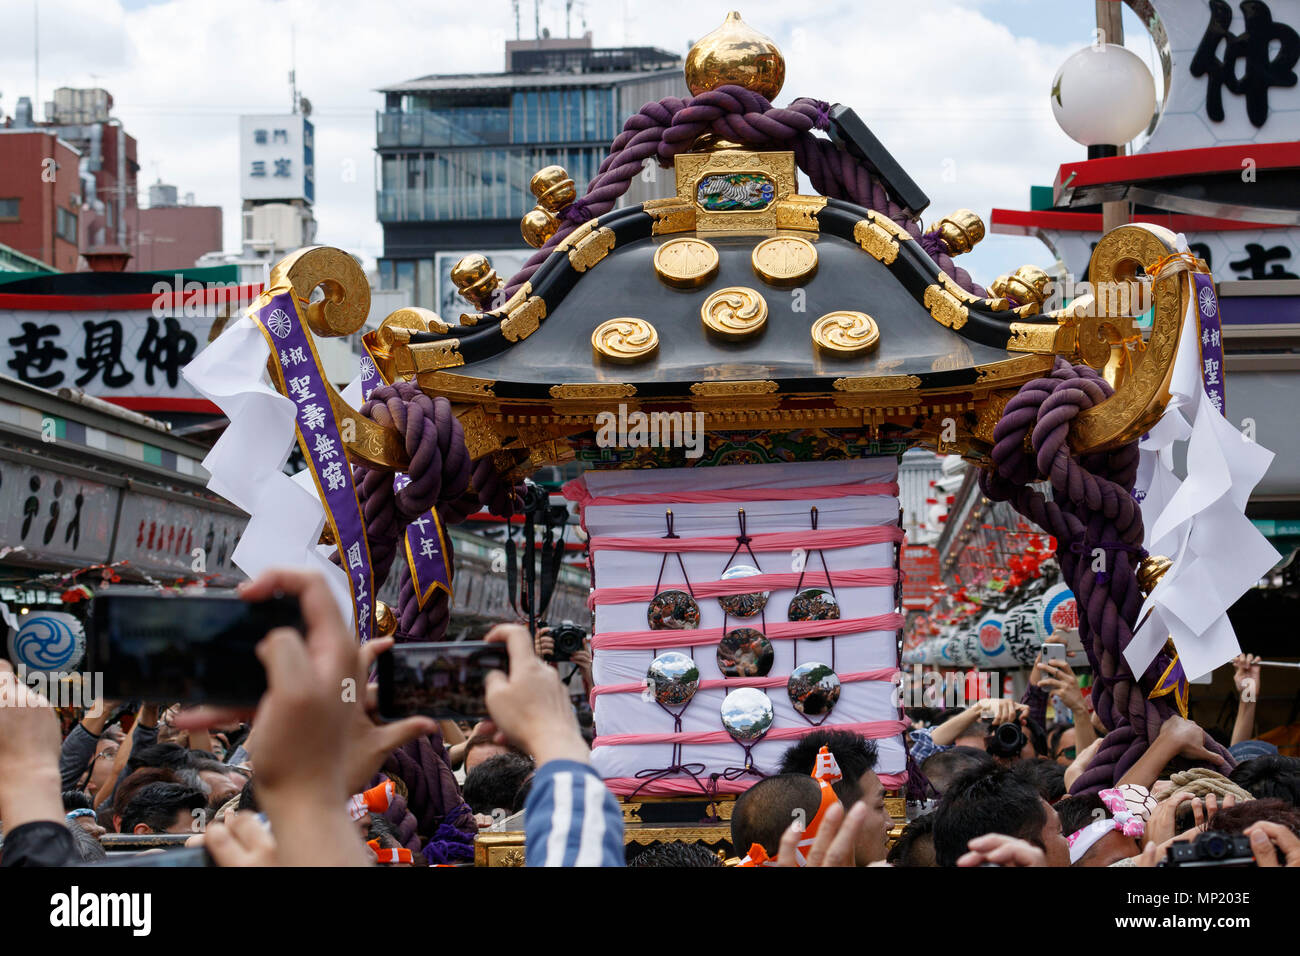 Participants carry a Mikoshi (portable shrine) during the Sanja Matsuri in  Asakusa district on May 20, 2018, Tokyo, Japan. The Sanja Matsuri is one of  the largest Shinto festivals in Tokyo, and